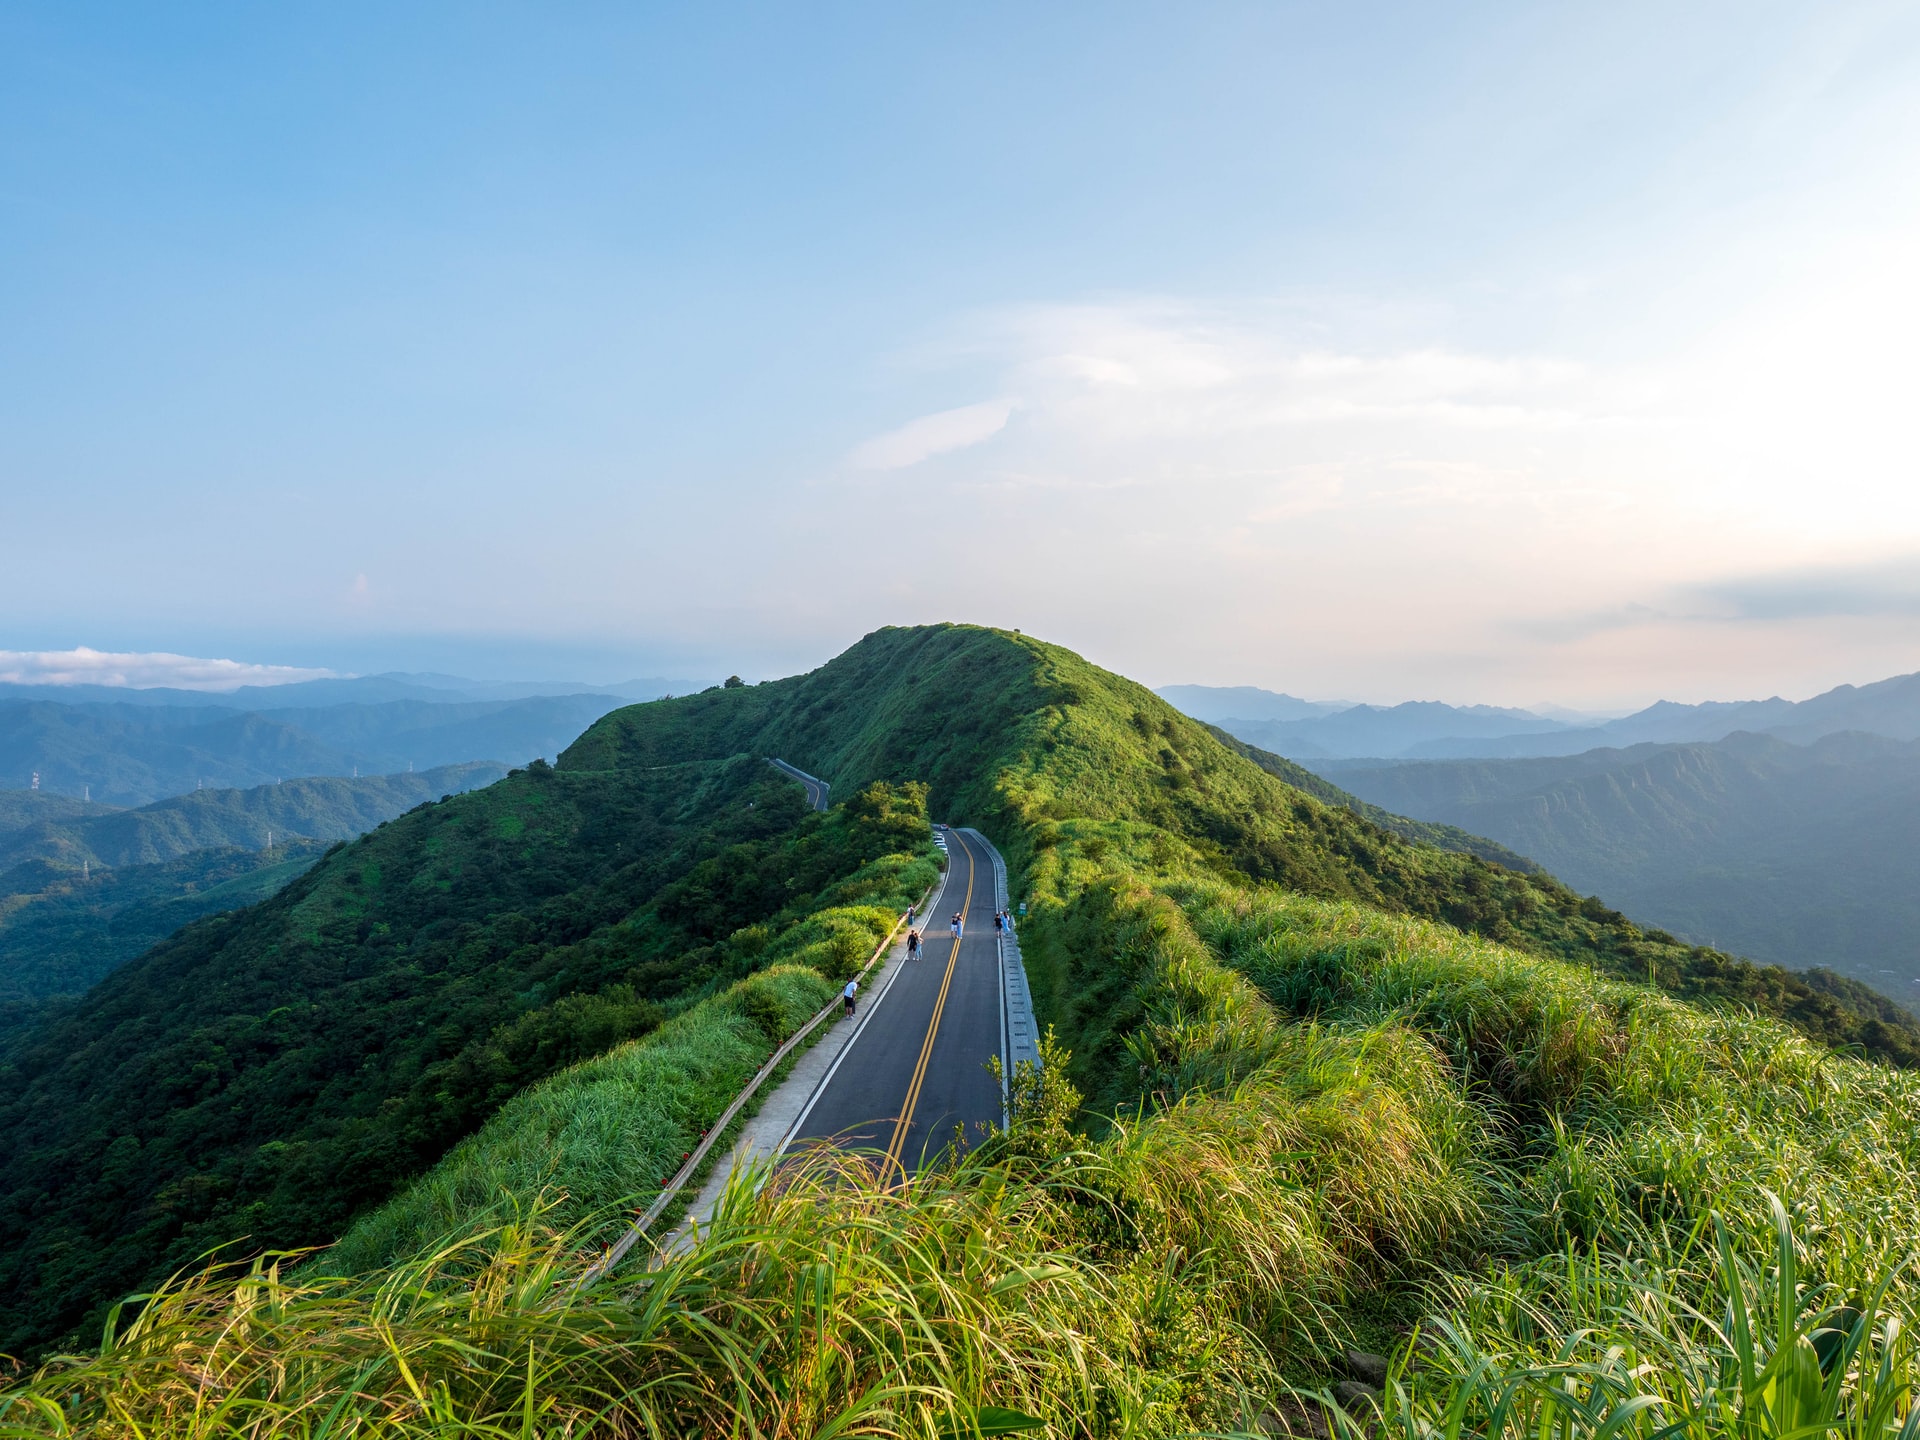 Limiting downside risks in Emerging Markets - a case study in the importance of ESG. Photo: Road in Taiwan through the mountains